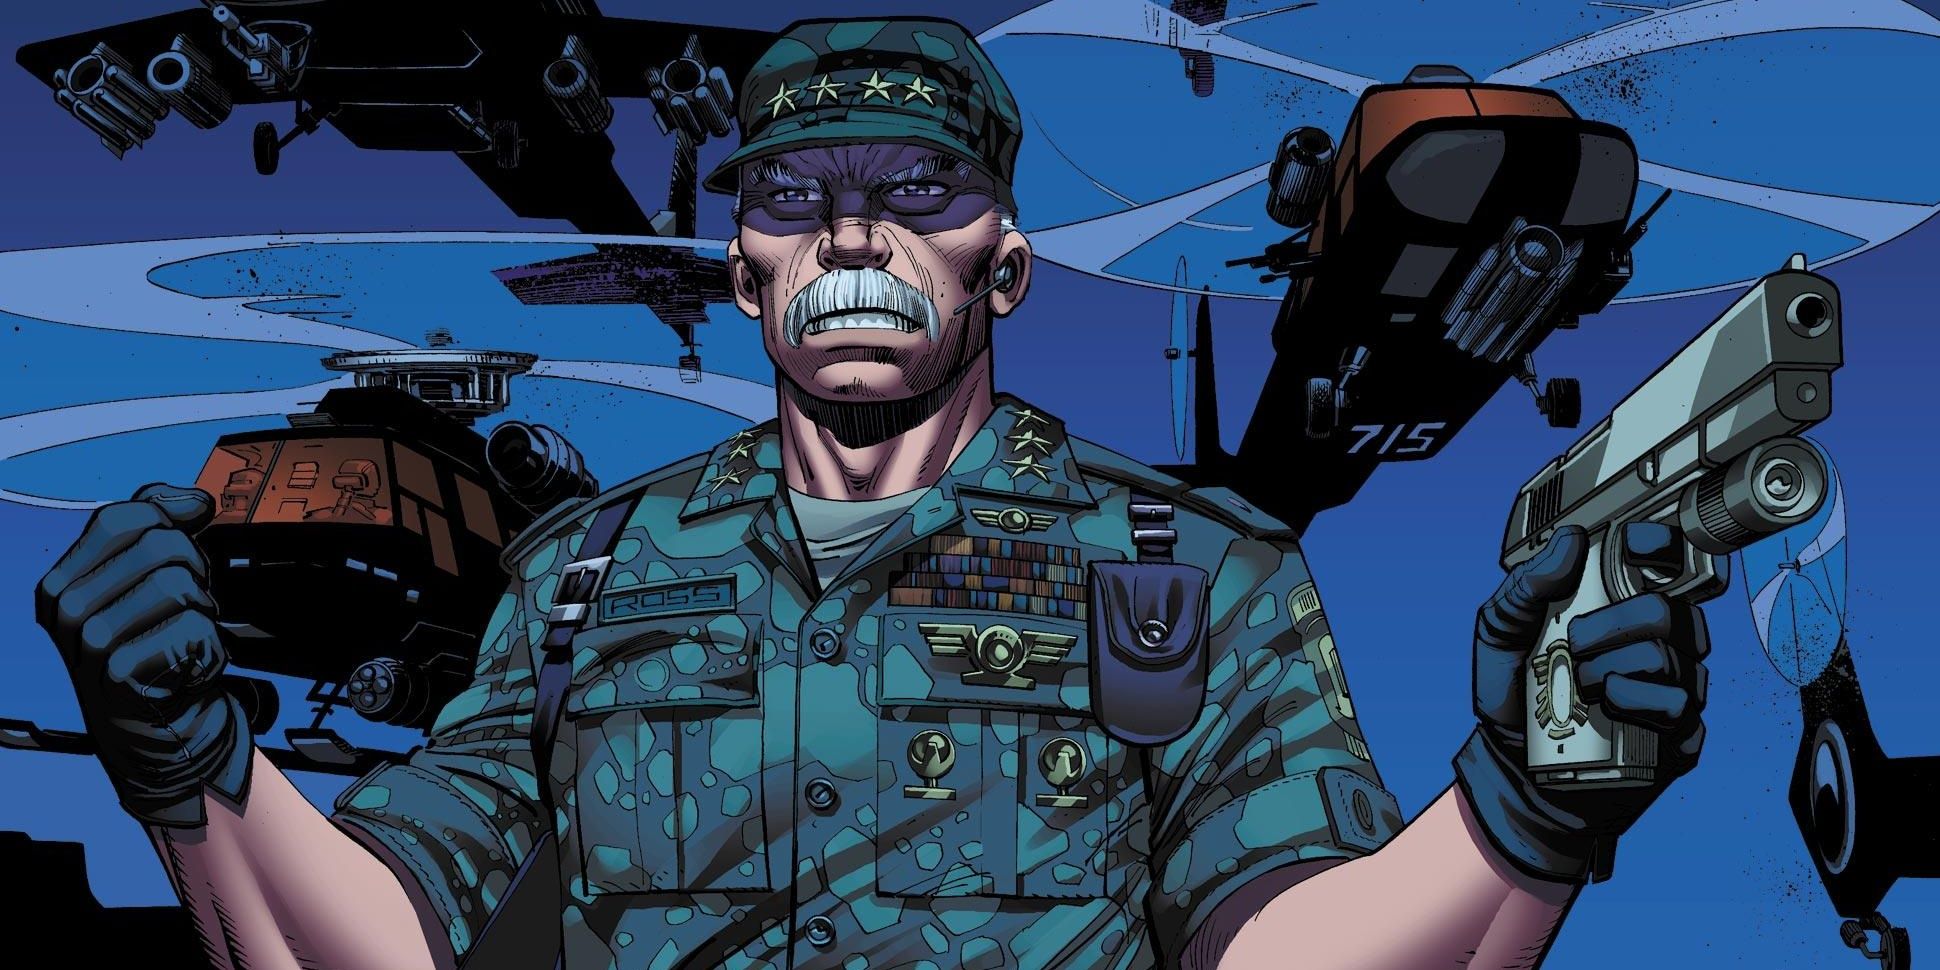 Marvel Thunderbolt Ross In His Military Uniform Holding A Gun With Military Helicopters Behind Him 